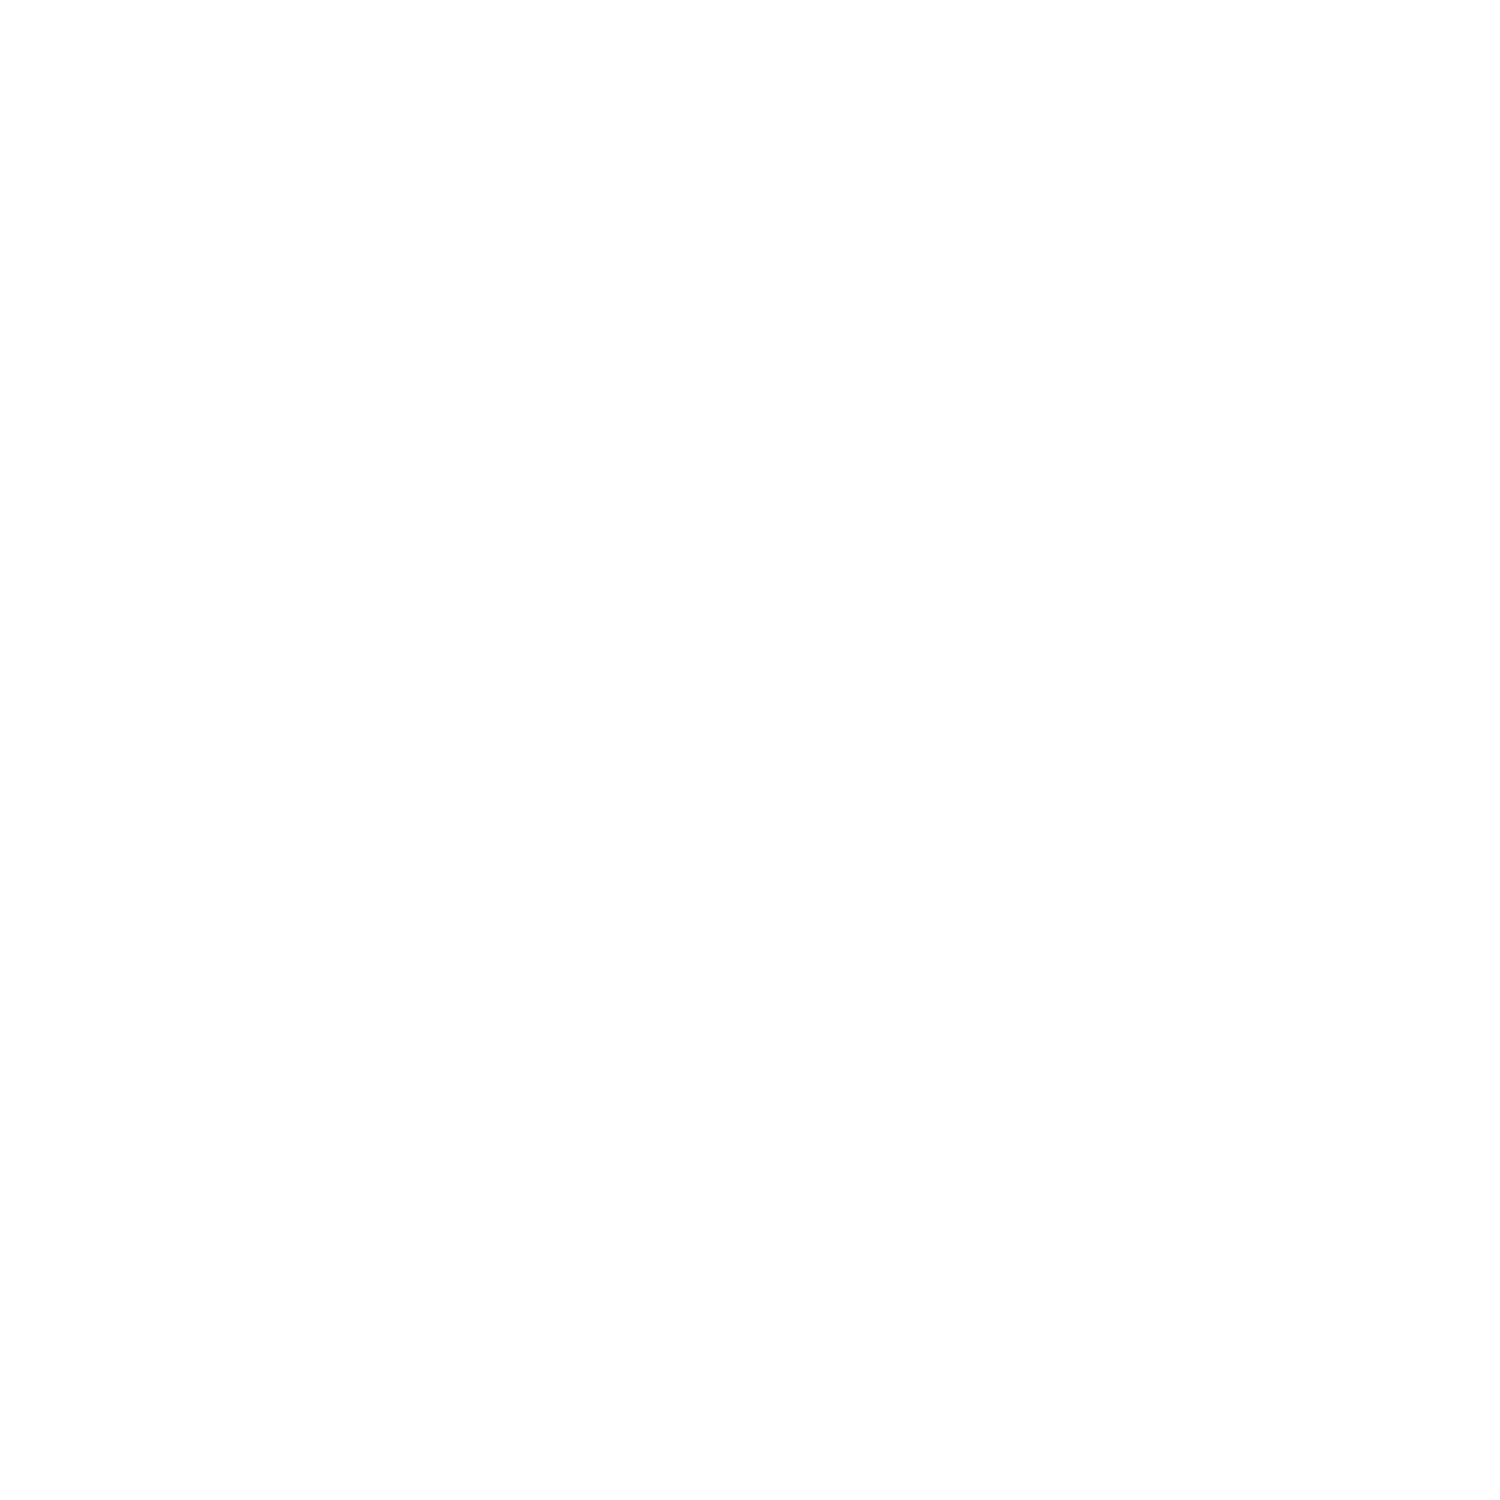 Fran Nelson Photography